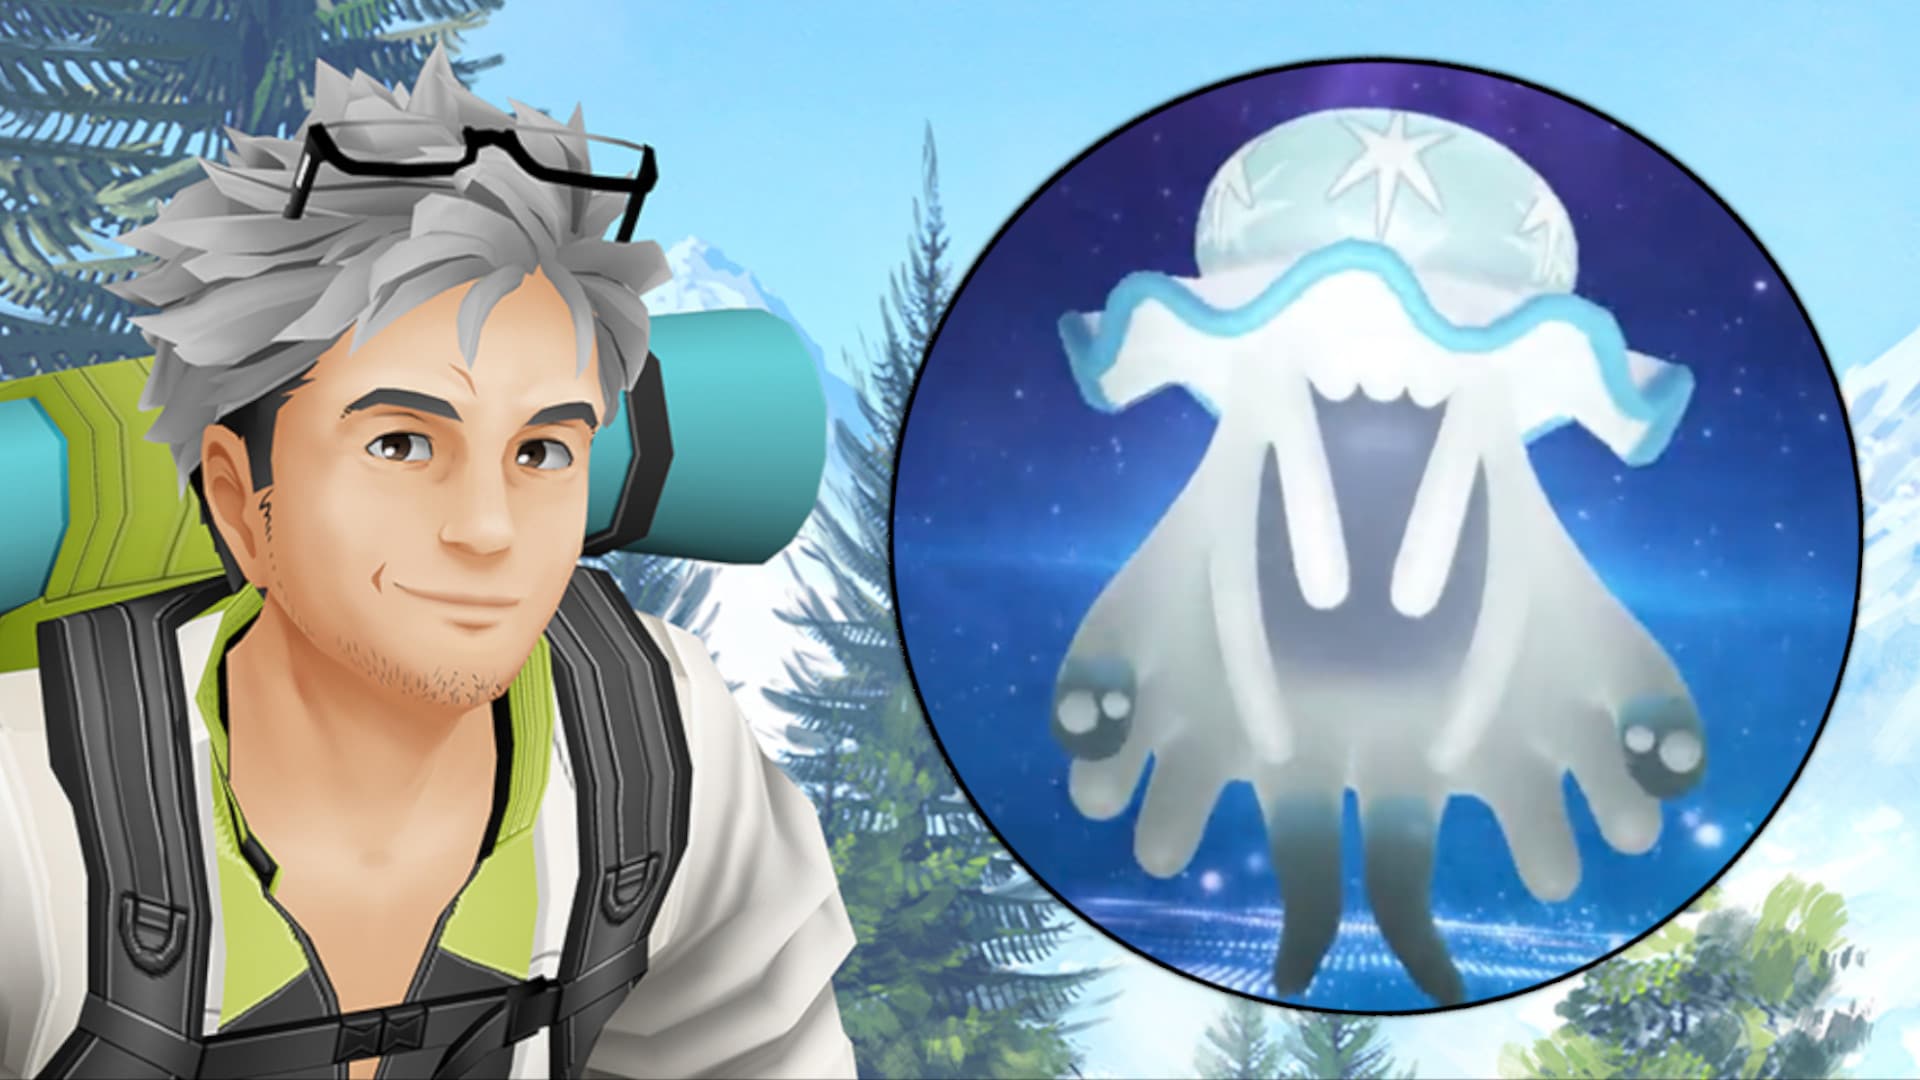 Pokémon GO brings a whole new type of monster into the game - these are "Ultra Beasts"